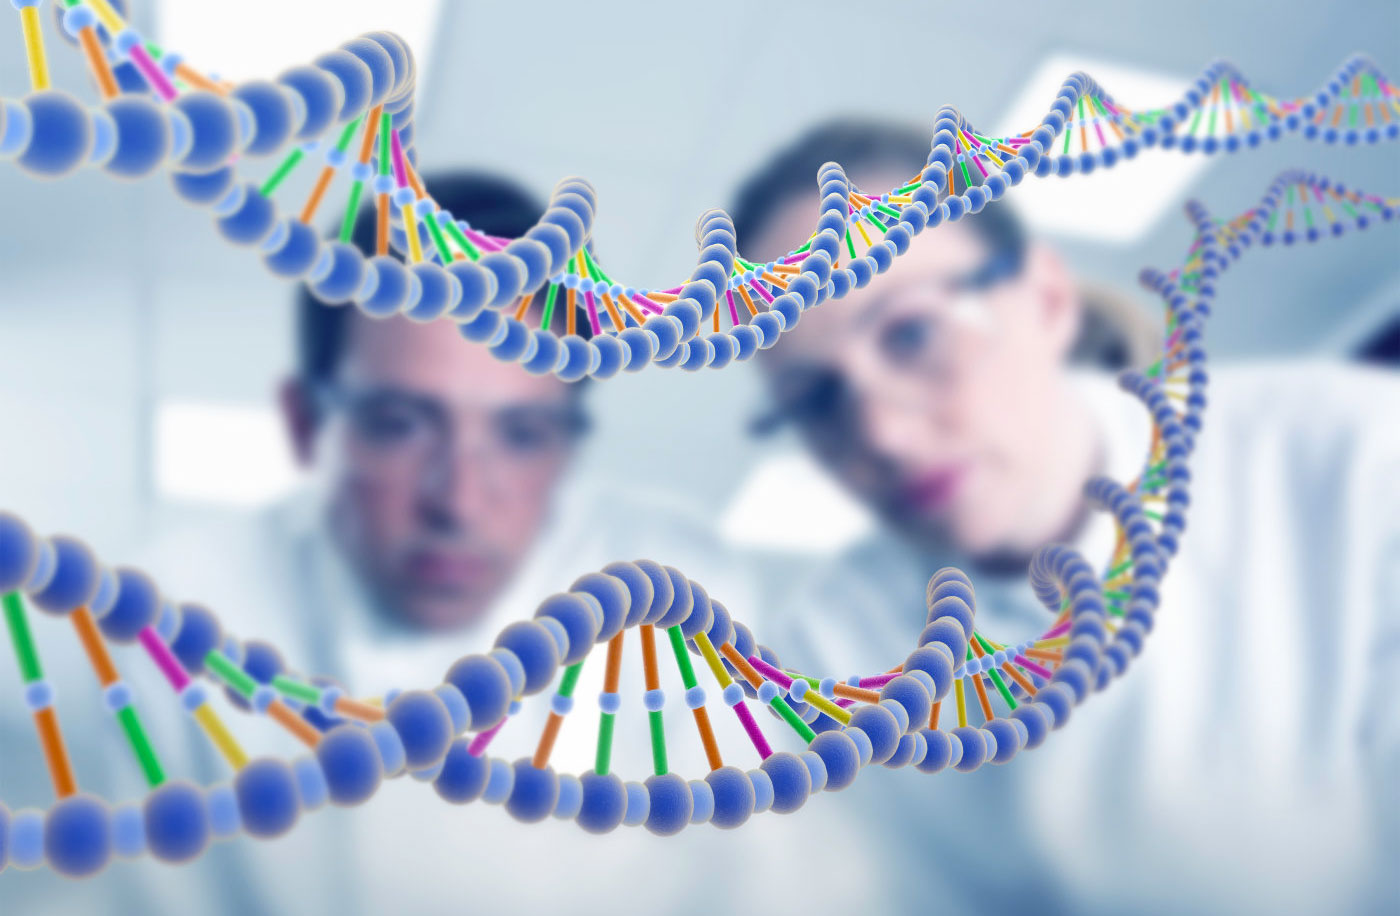 Researchers create mirror image of DNA-copying protein